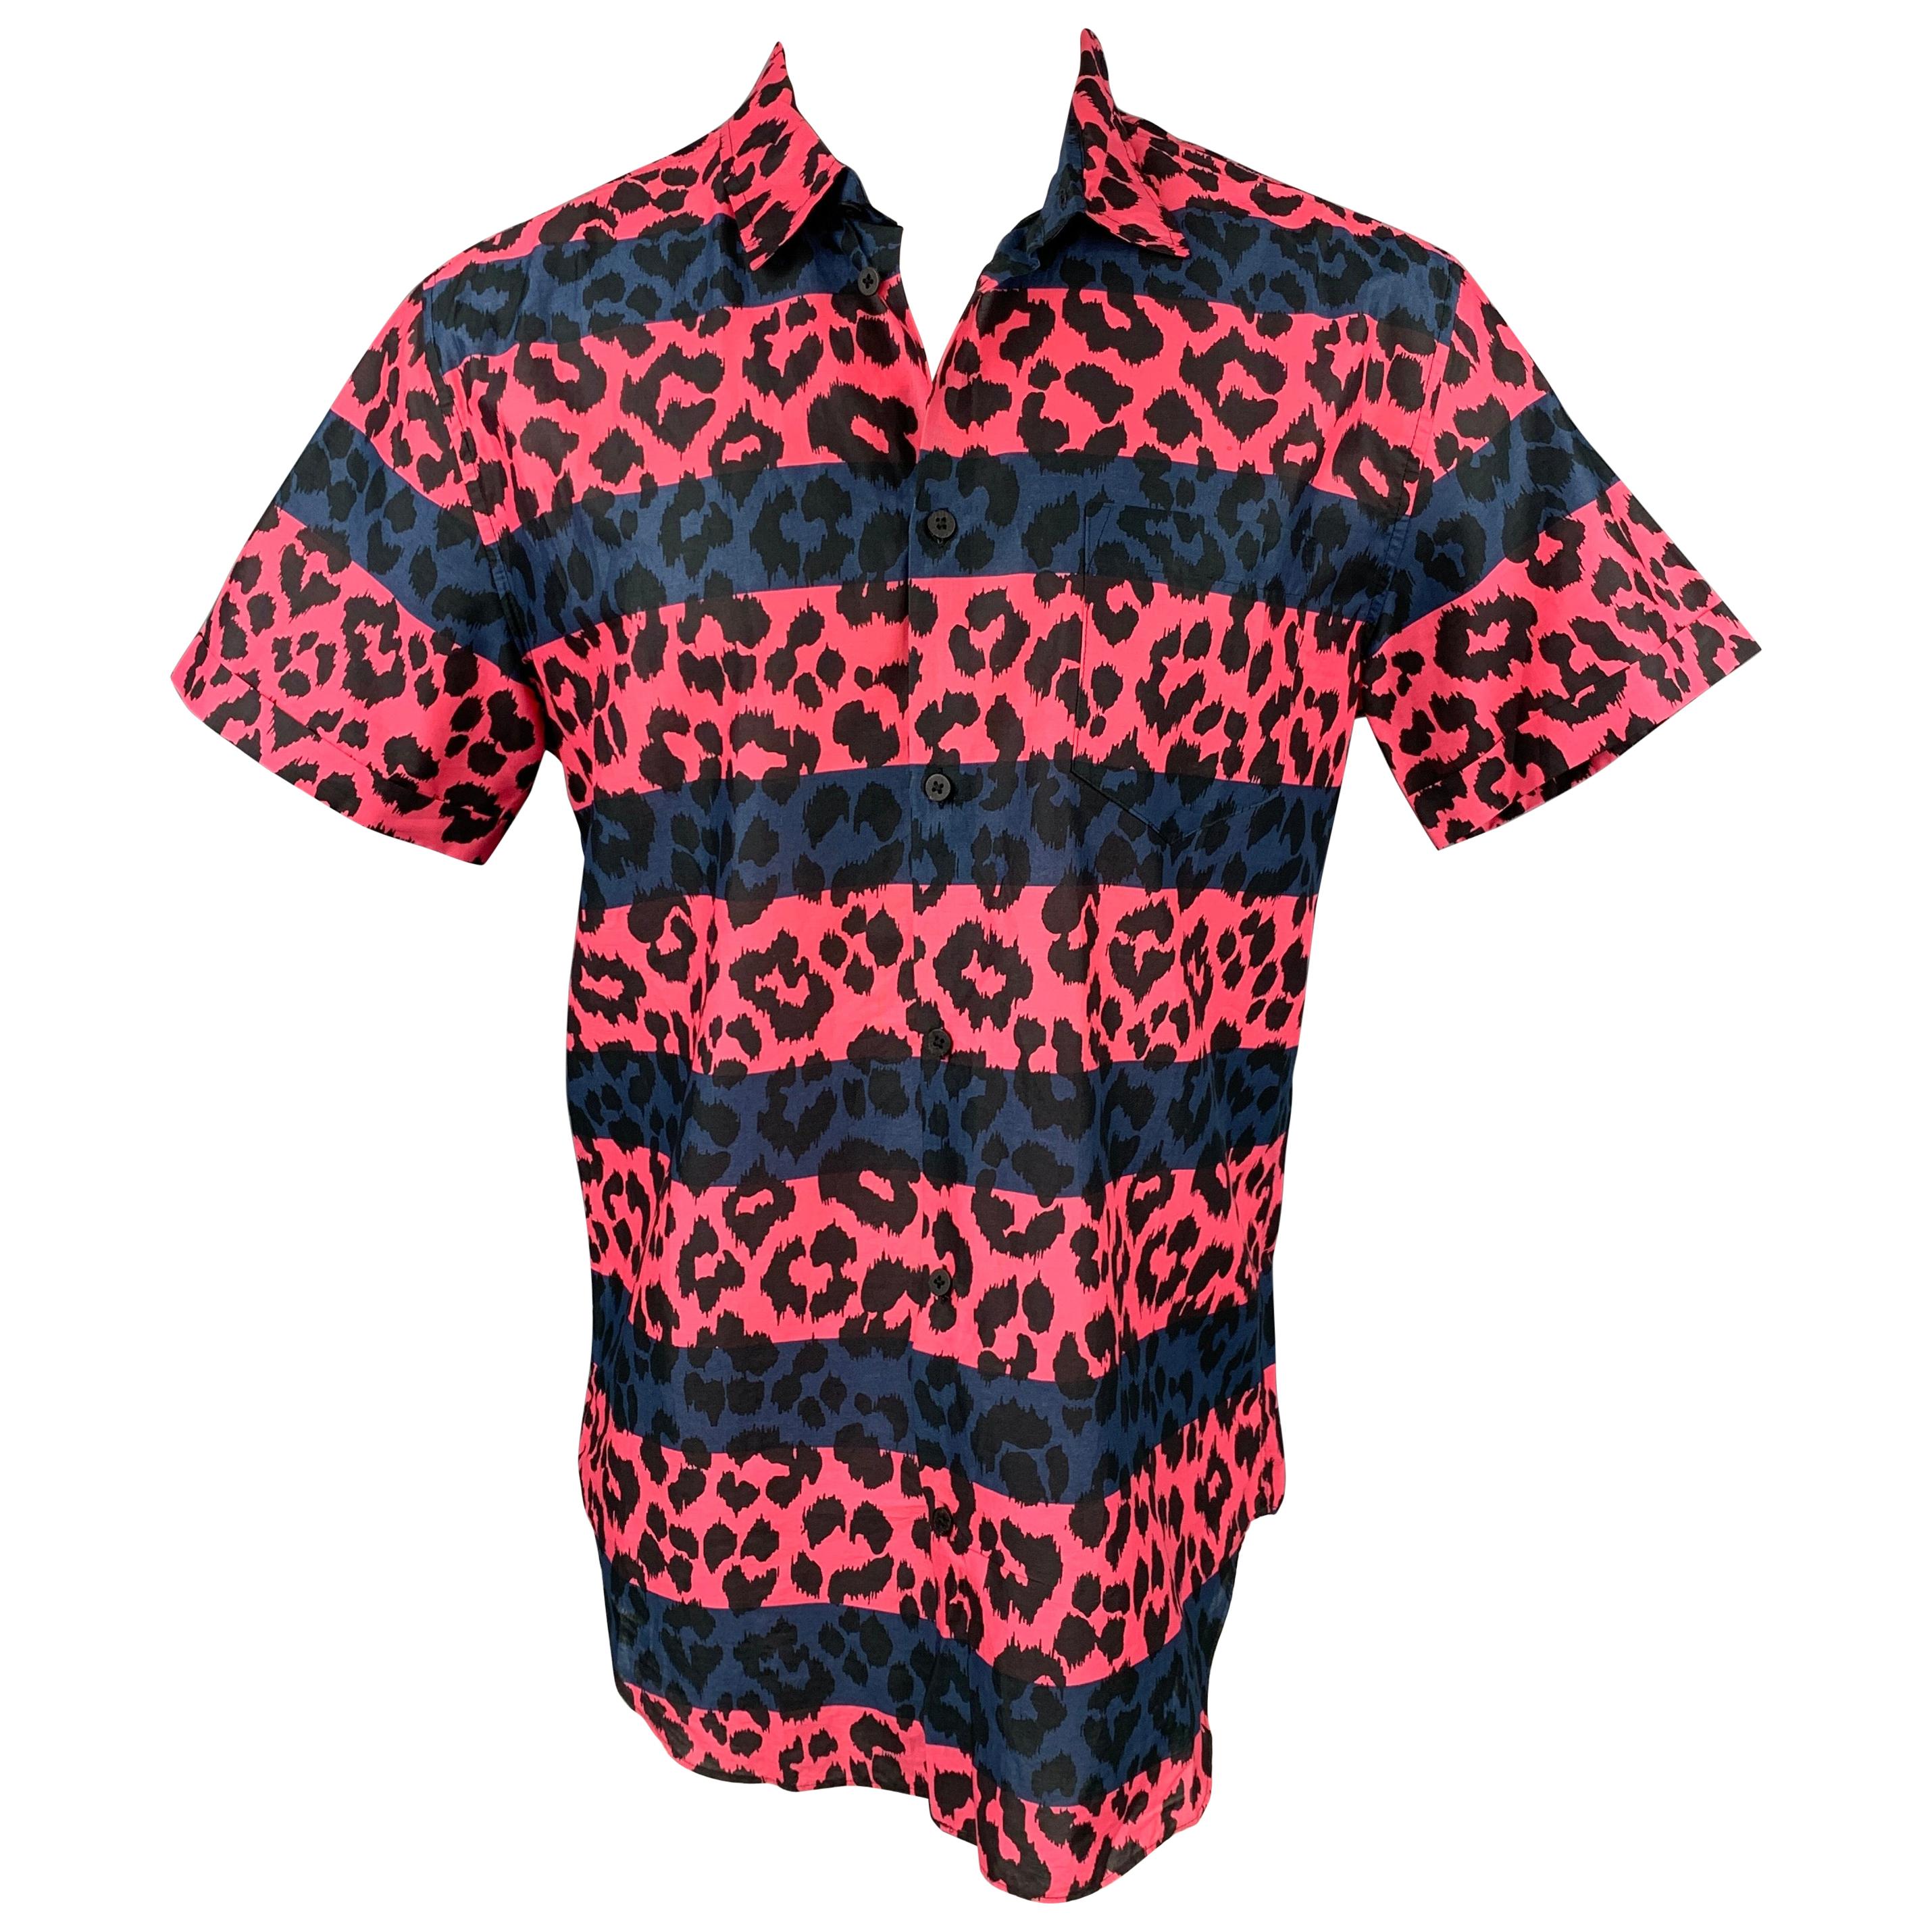 MARC by MARC JACOBS Size L Pink & Navy Leopard Print Cotton Short Sleeve Shirt